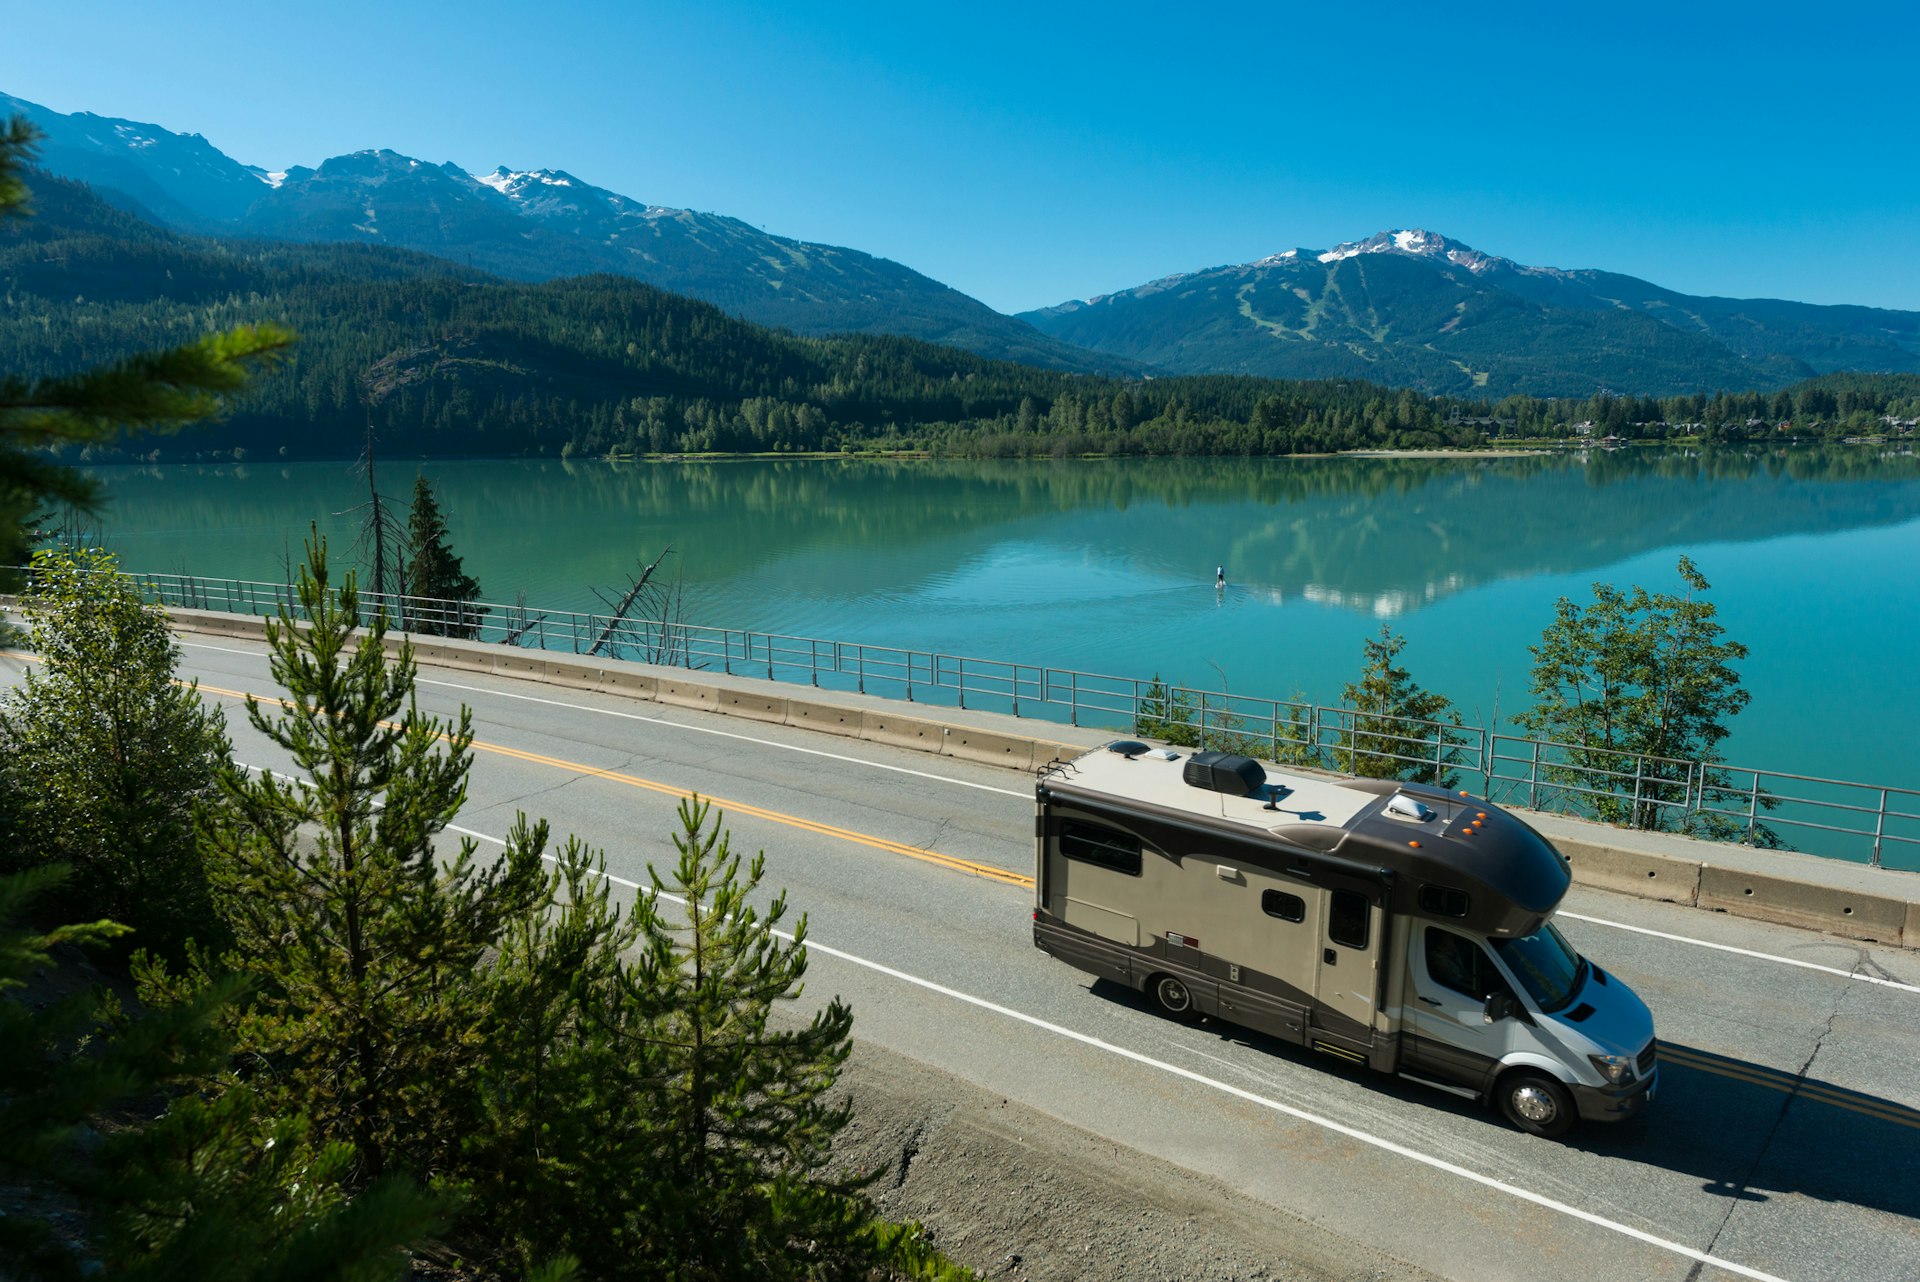 Large RV driving along a highway that hugs the edge of a turquoise lake